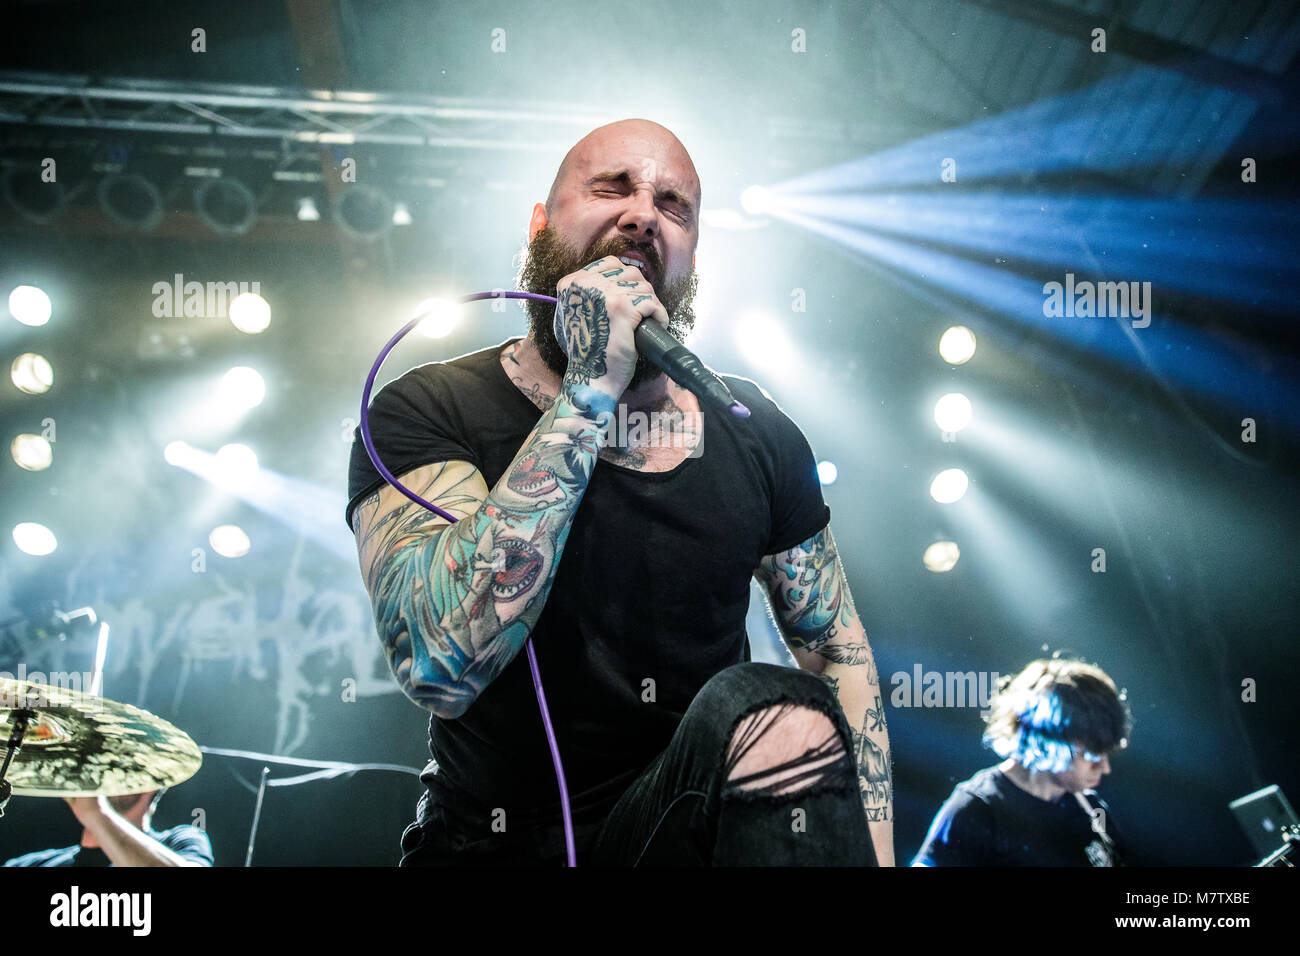 Denmark, Copenhagen - March 12, 2018. The American Christian band August Burns Red performs a live concert at Pumpehuset in Copenhagen. Here vocalist Jake Luhrs is seen on stage.